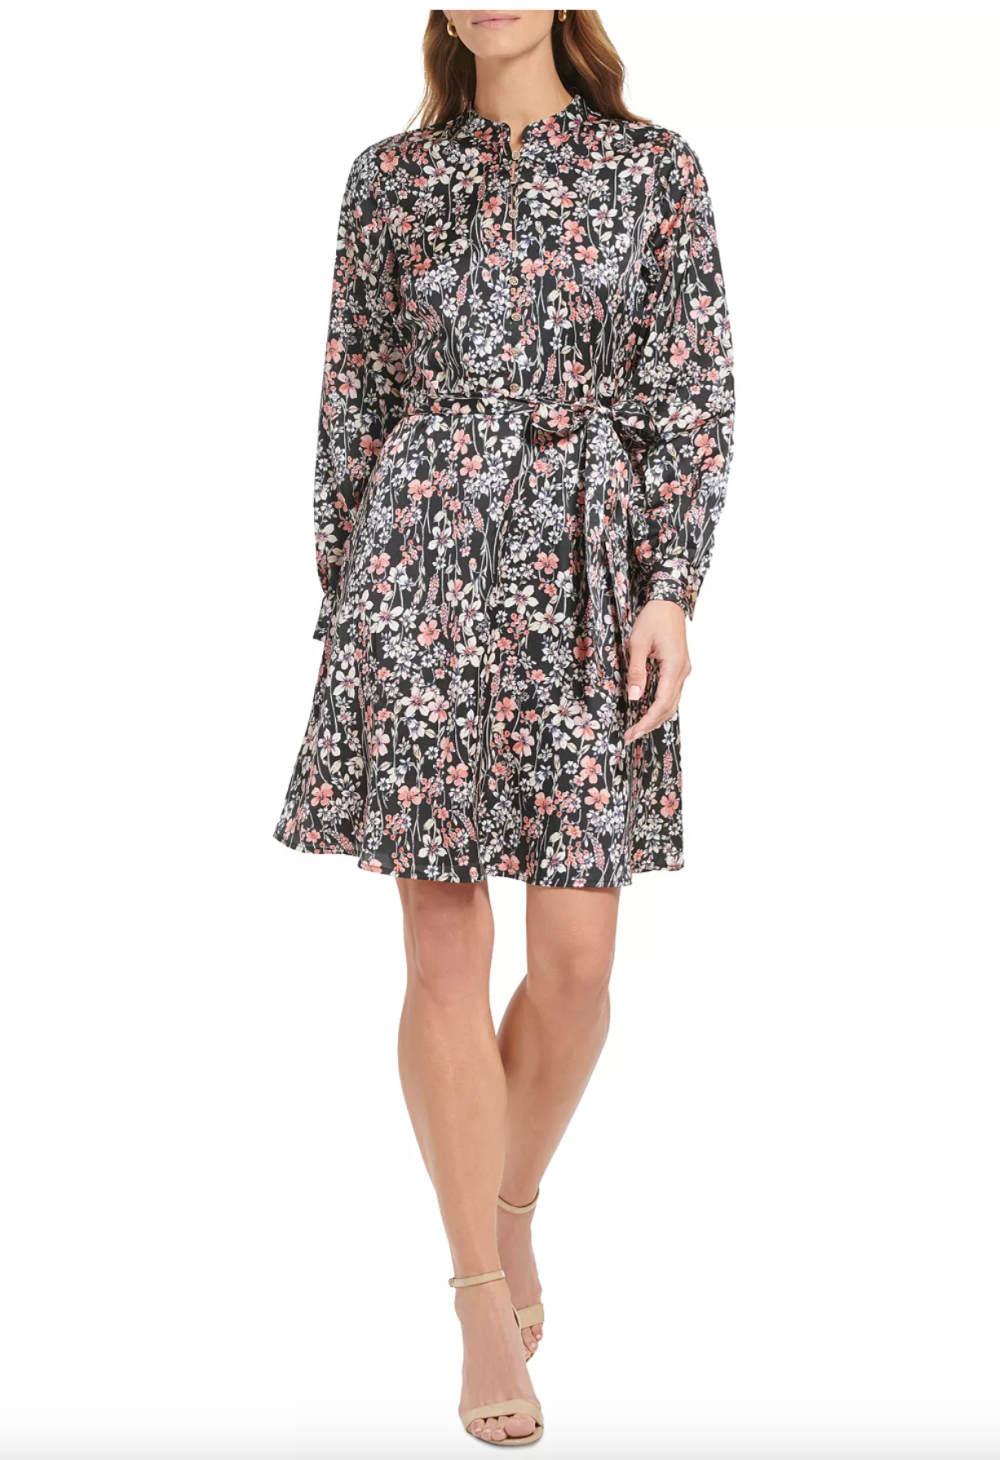 Tommy Hilfiger Women's Long-Sleeve Charmeuse Fit & Flare Dress